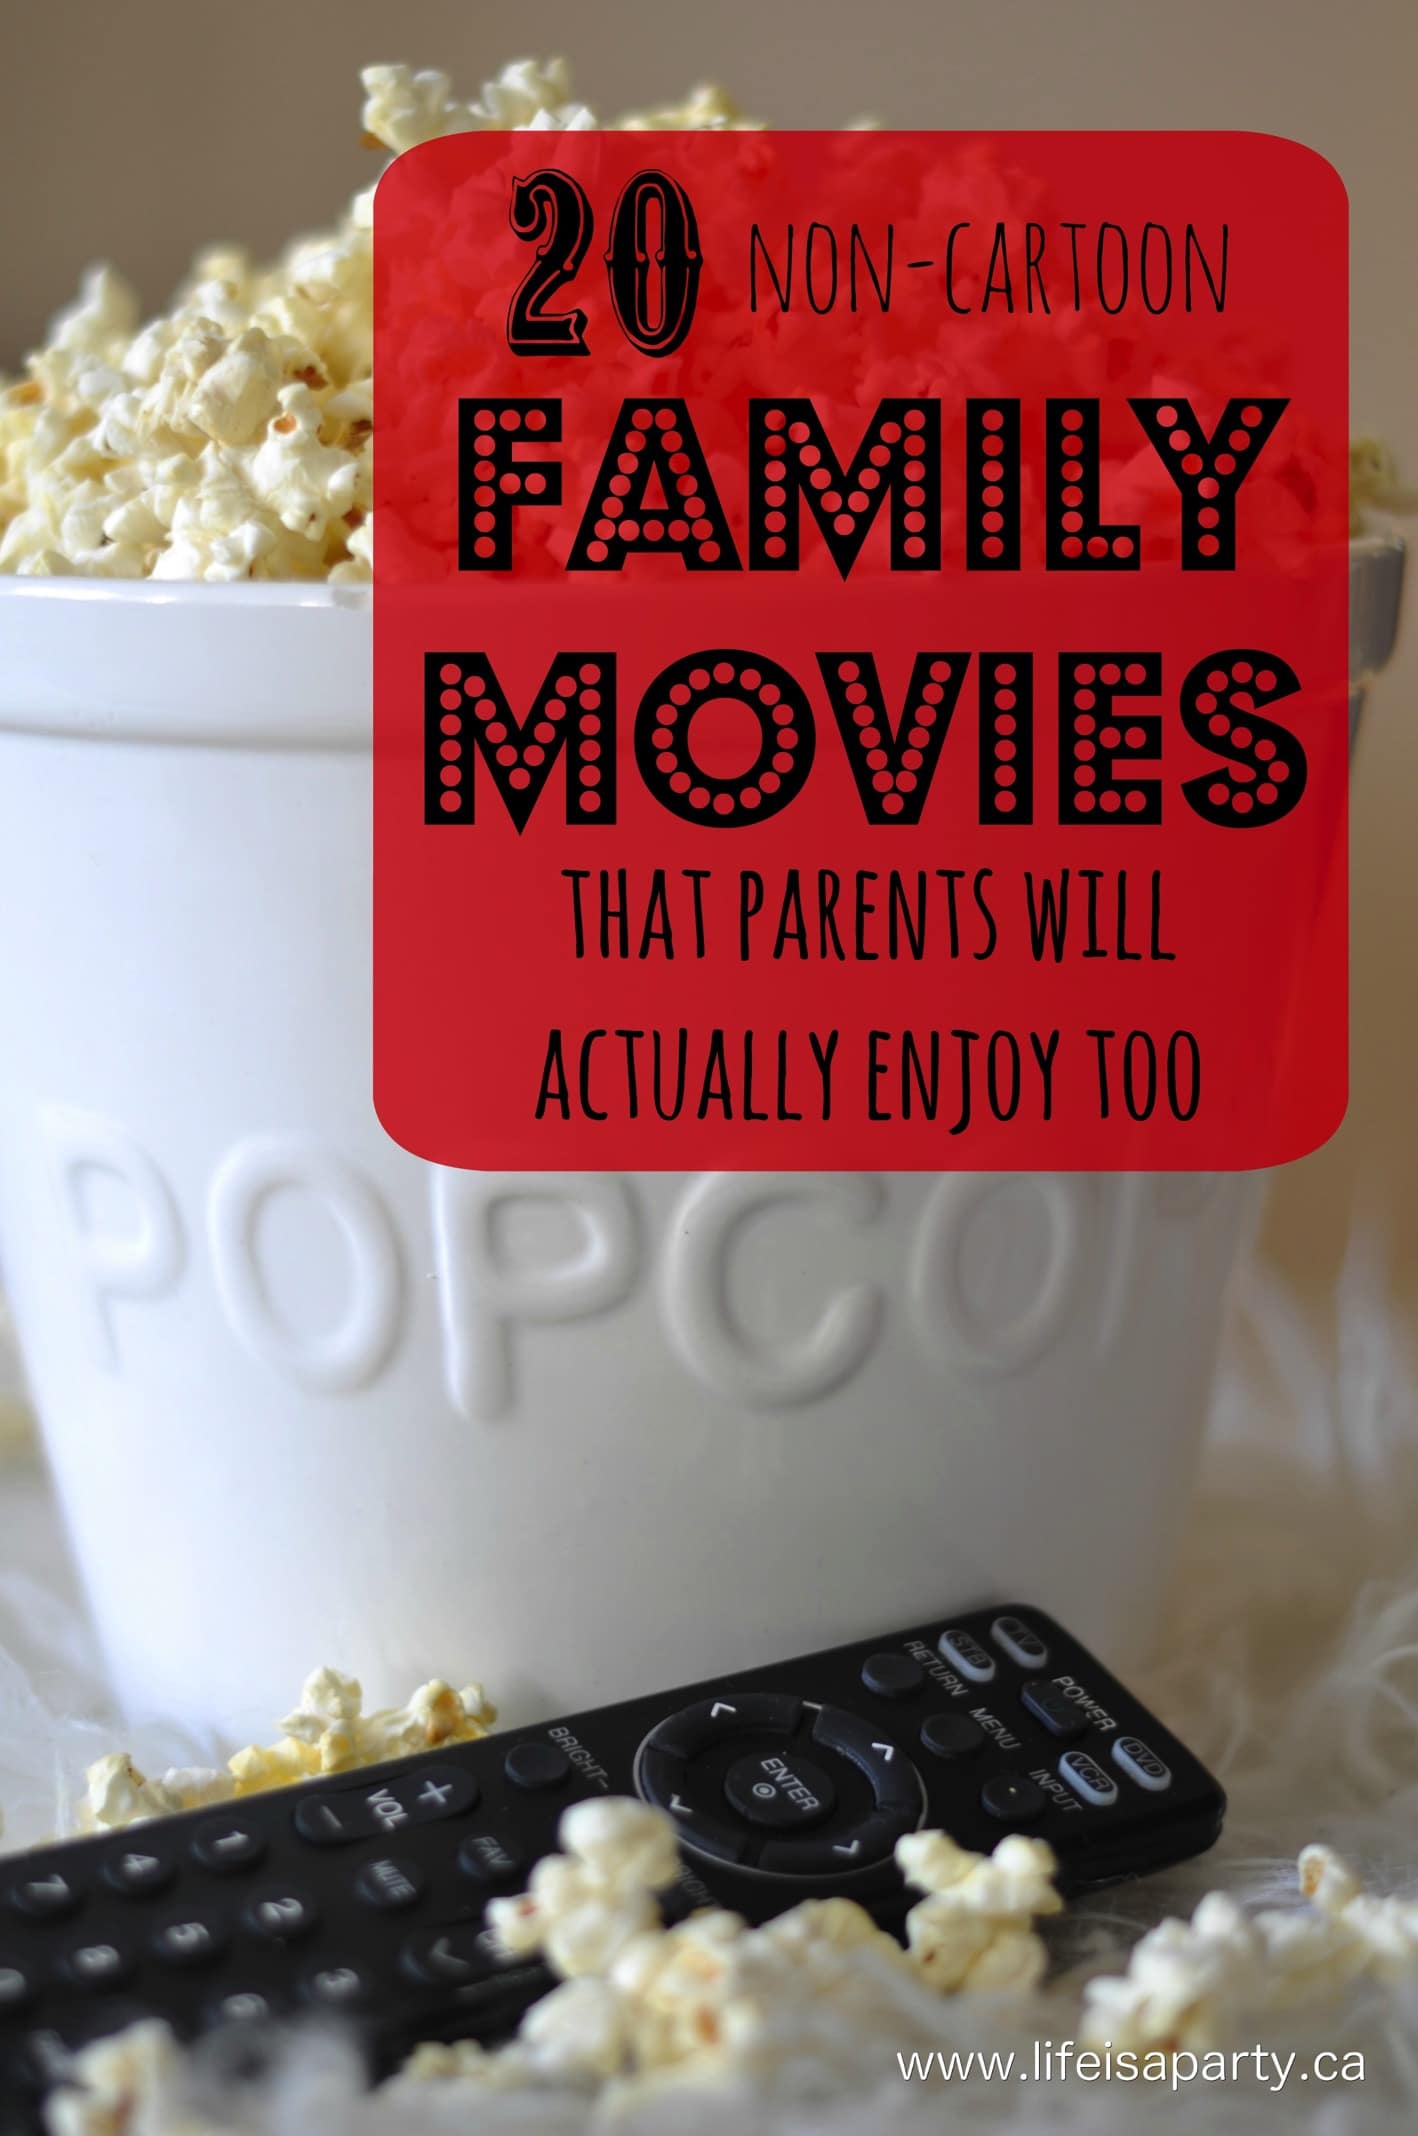 Non Cartoon Family Movies: Best non cartoon family movies that parents will actually enjoy too for family movie night or anytime.